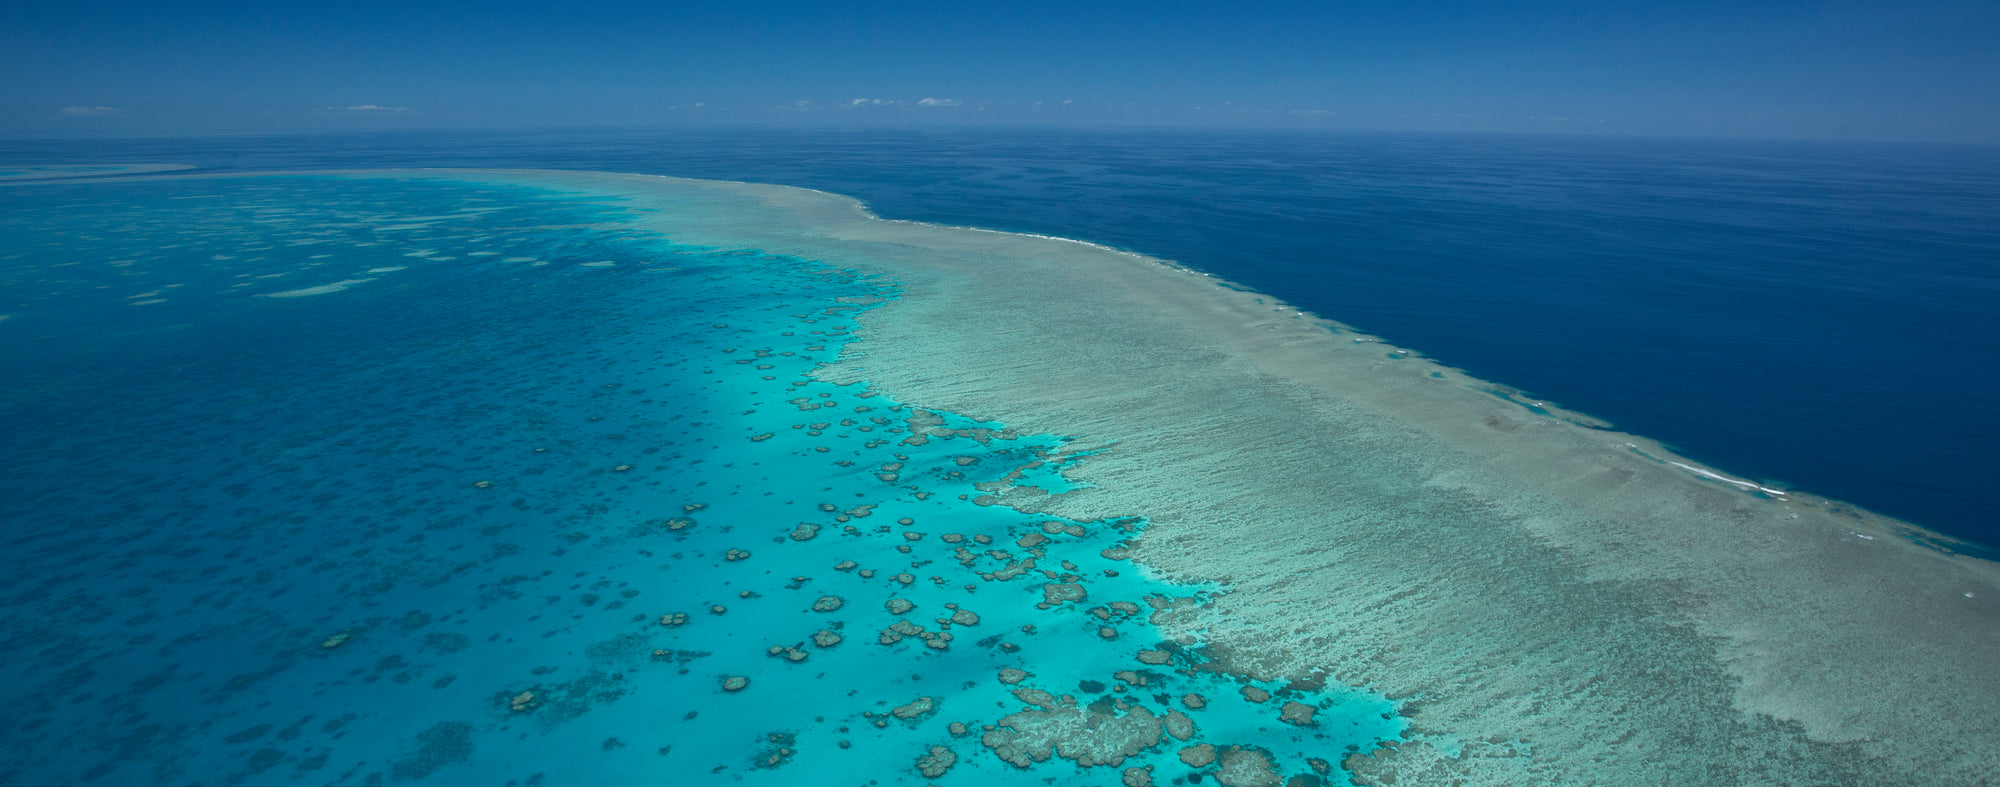 large island of coral reef with waves breaking on the surface and the darker deep blue is beyond